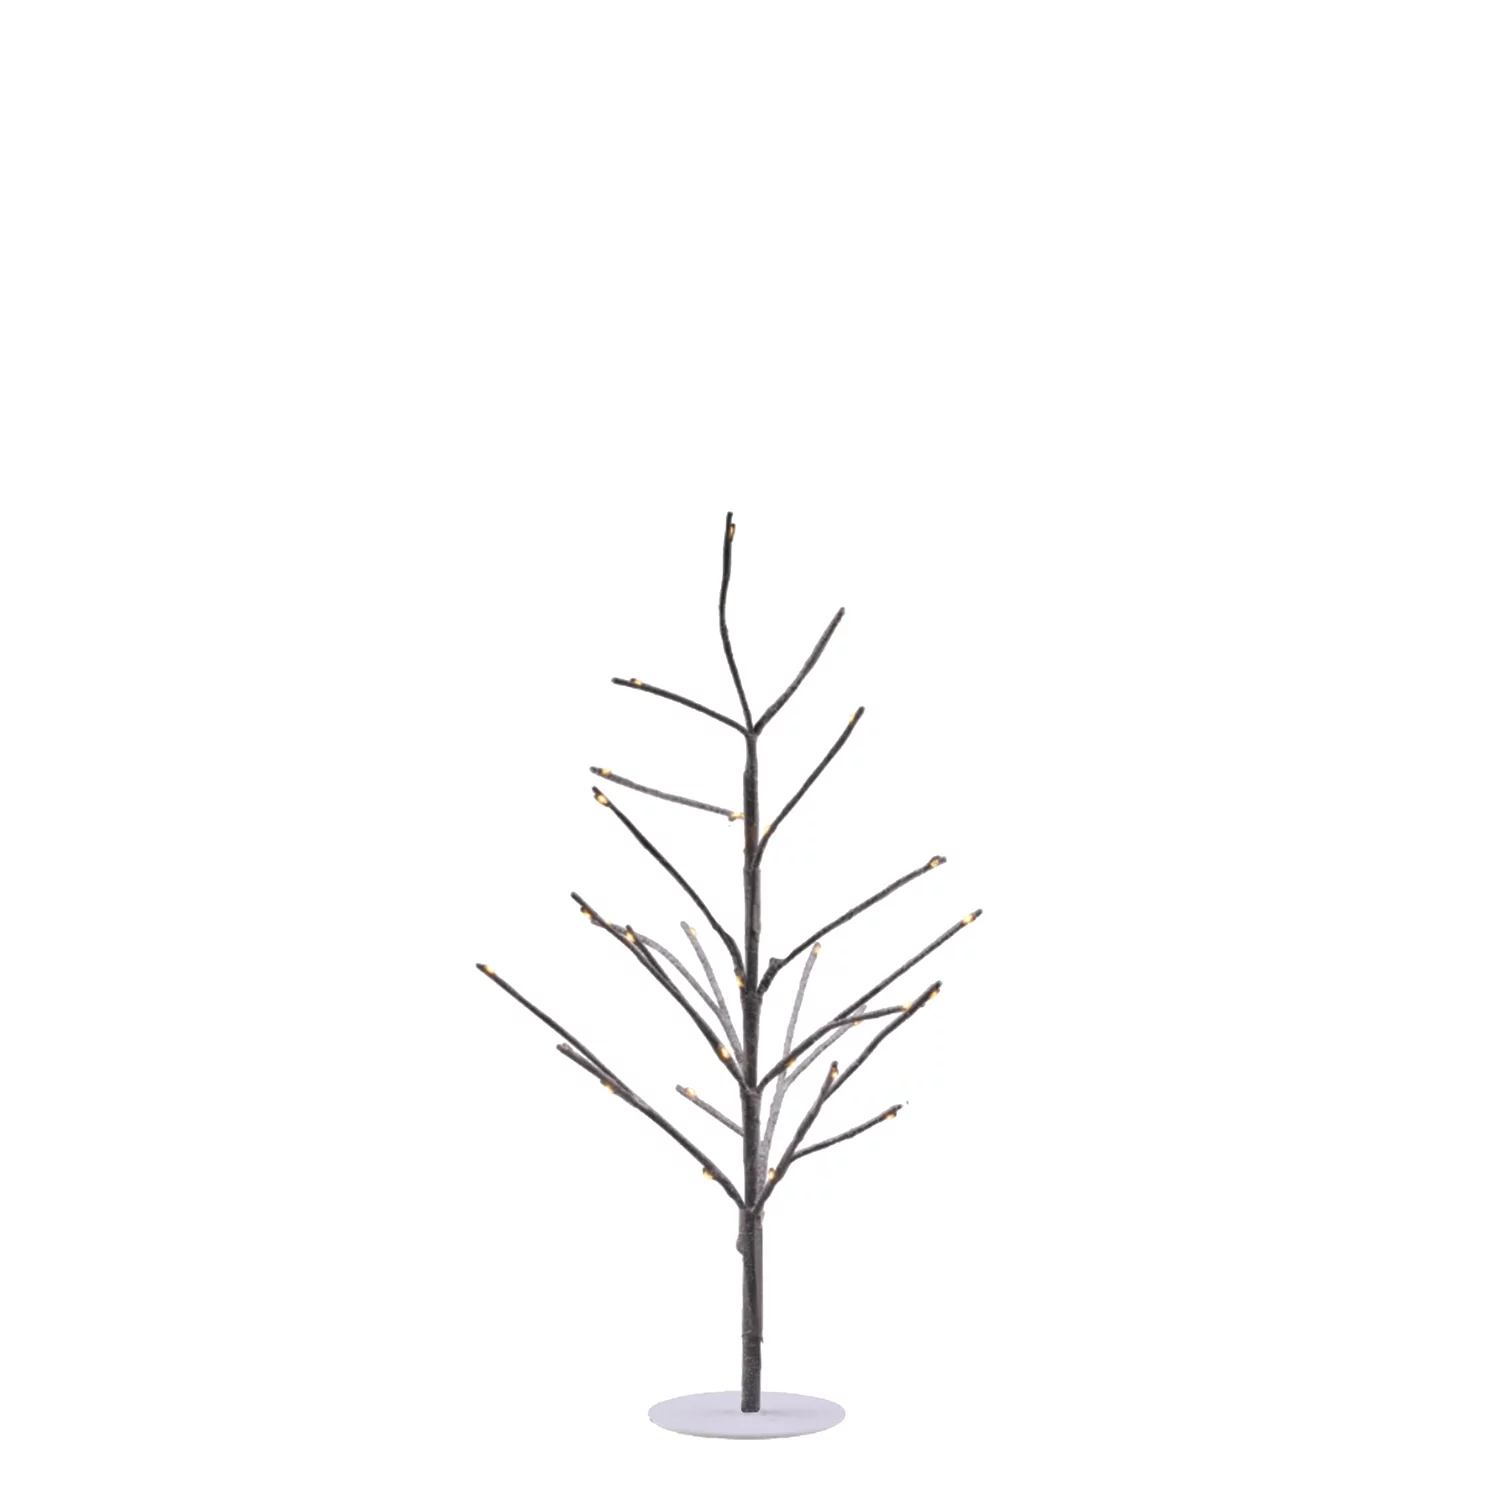 https://www.cairocdn.de/out/pictures/generated/product/1/1500_1500_60/led-lichterbaum-mit-fuss-kira-tree-28-lichter-112423(1).webp